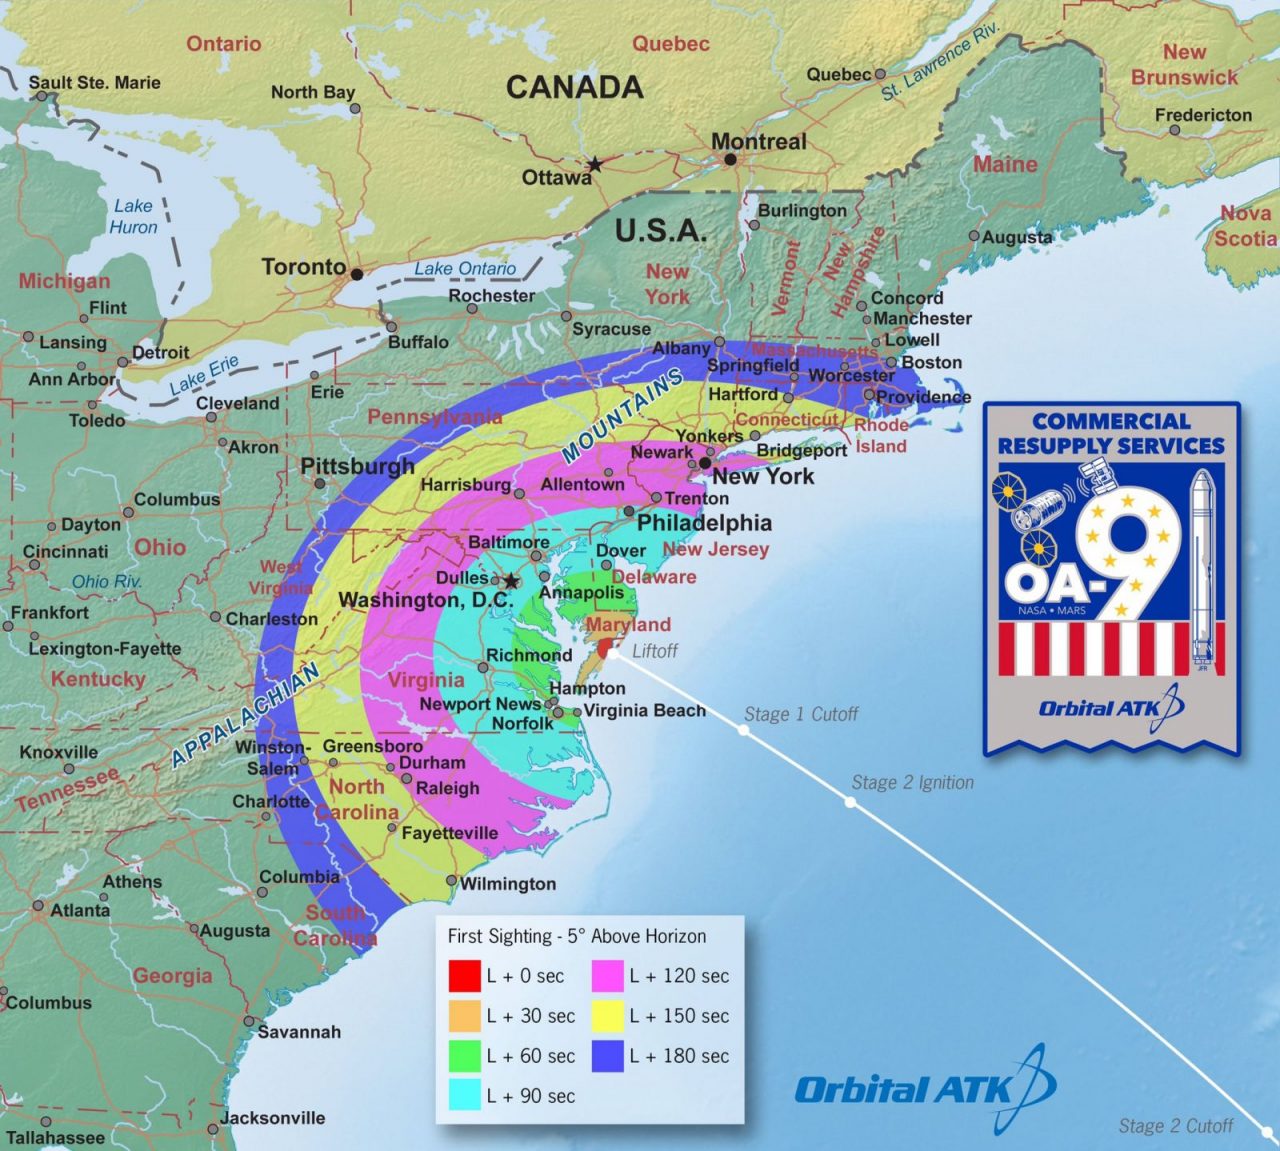 Orbital ATK's Antares rocket rescheduled for launch on Monday at 4:39 a.m. EDT